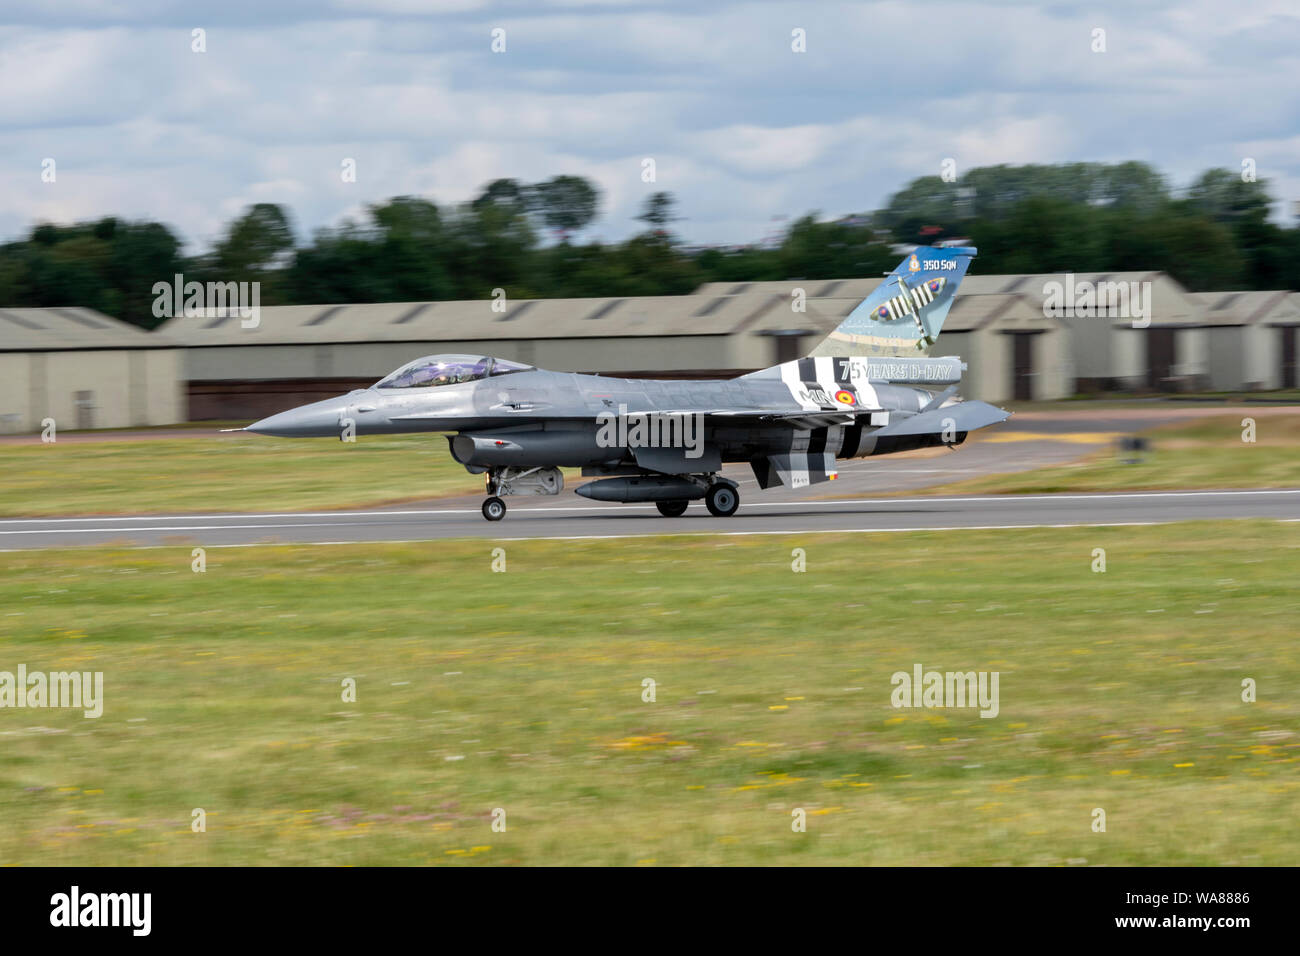 F-16 Airfraft featured in the NATO 70th Anniversary flypast at the Royal International Air Tattoo 2019 from 2 wing; Belgian Air Component; Kleine Brog Stock Photo